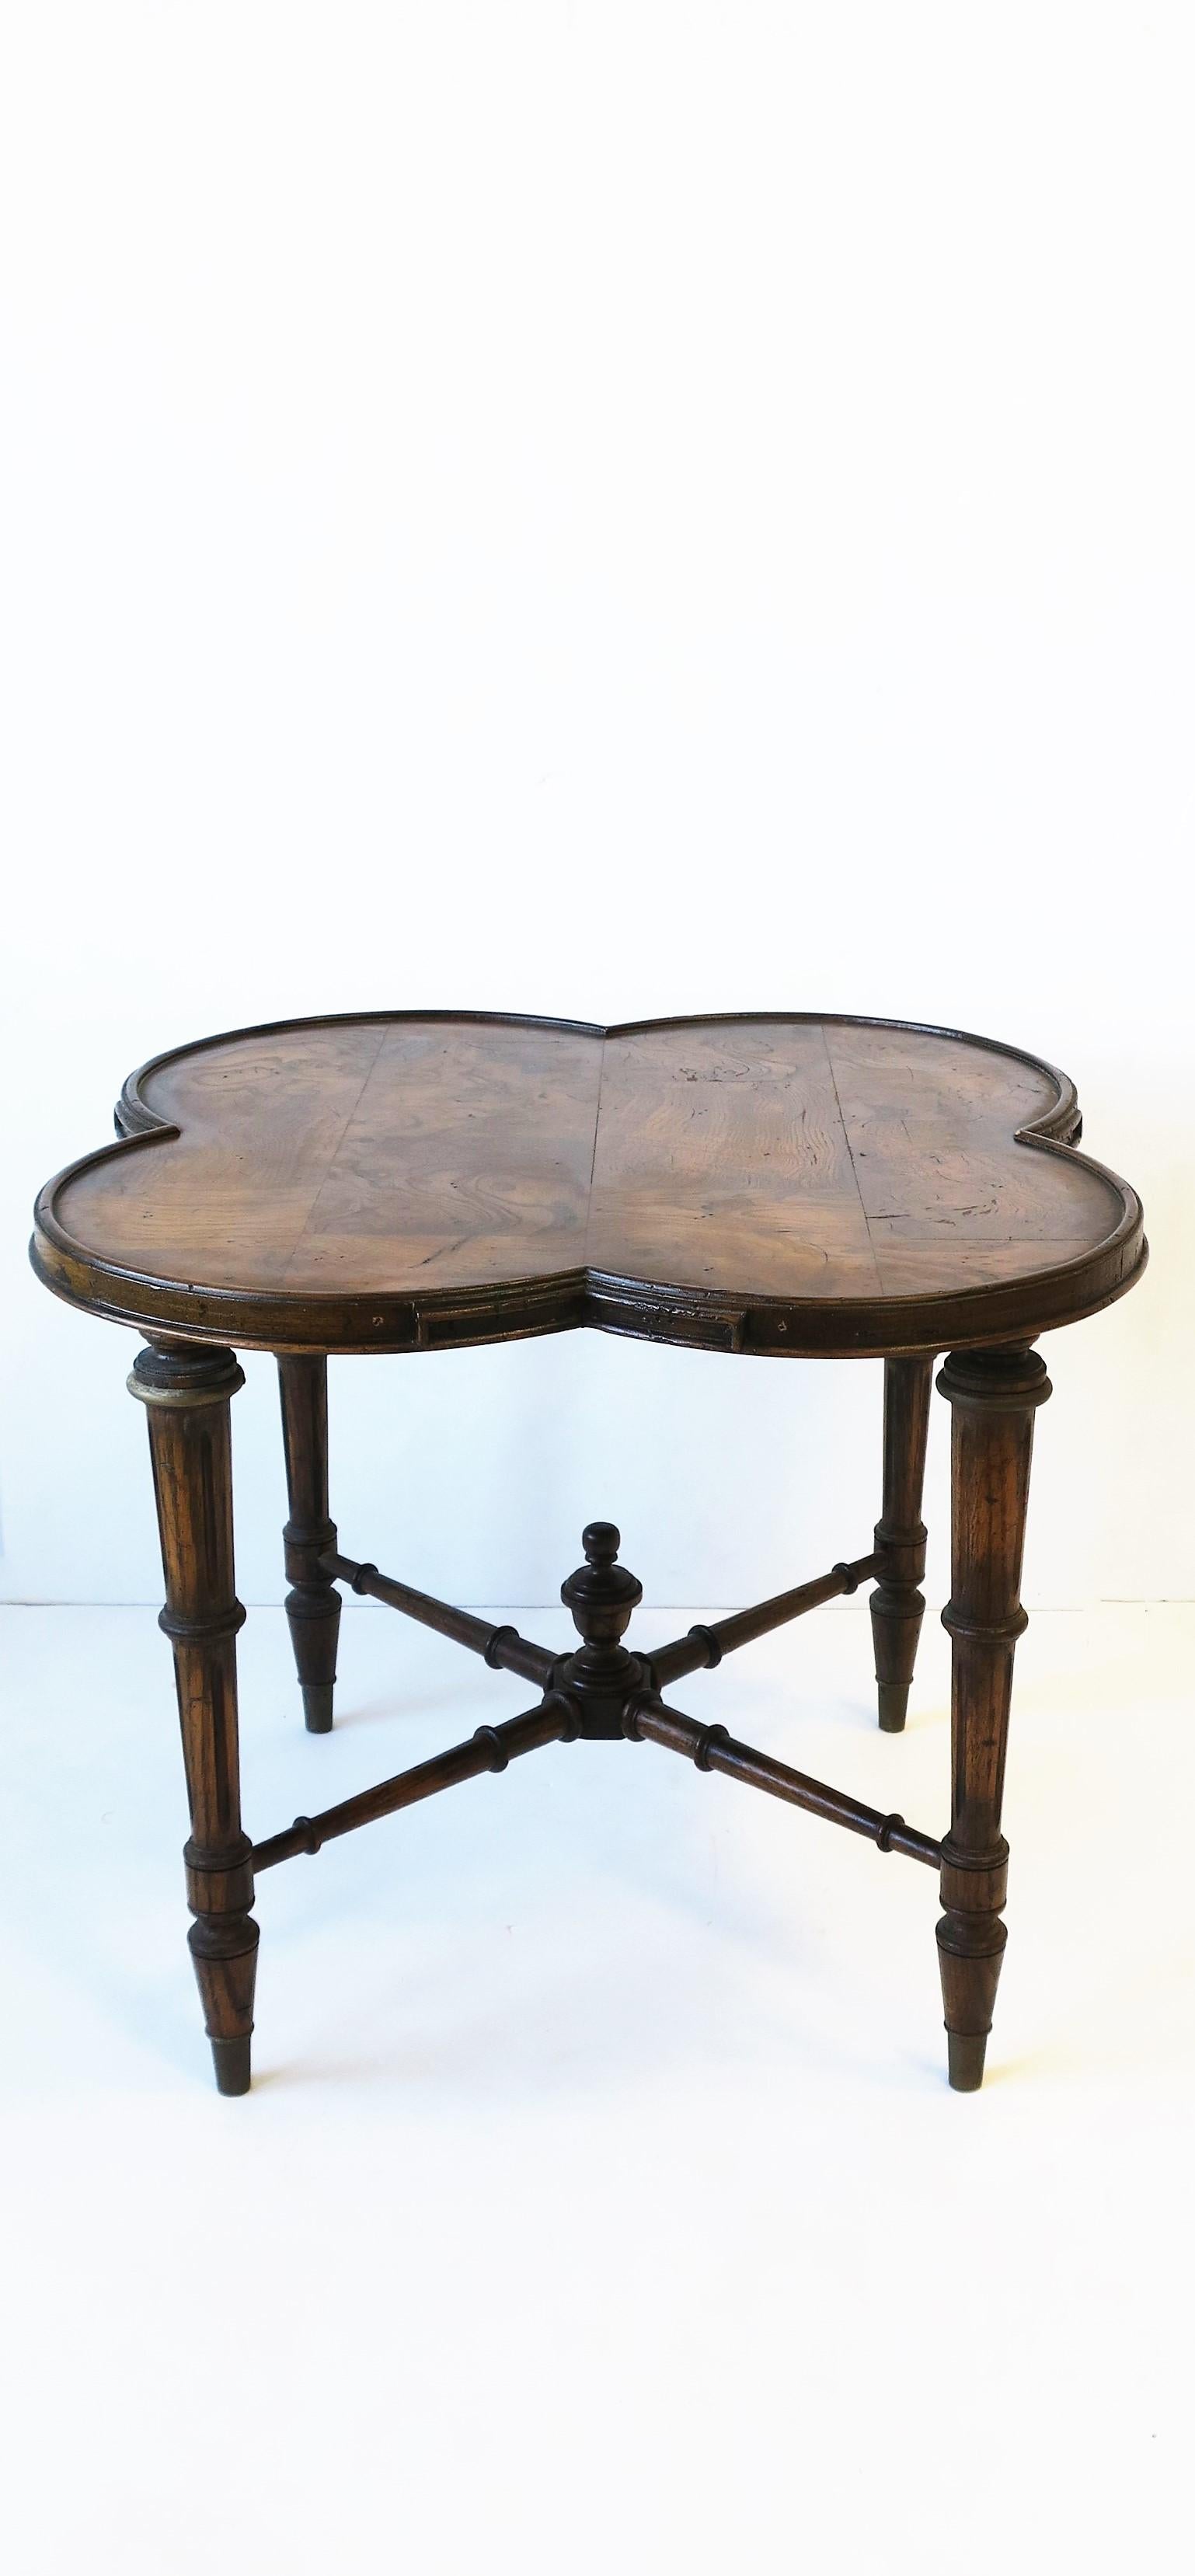 A beautiful burled walnut wood end table with an Alhambra clover top, detailed legs, and stretcher base finish with a carved finial, circa mid-20th century or earlier, Europe. Table can site in two positions as demonstrated in images.